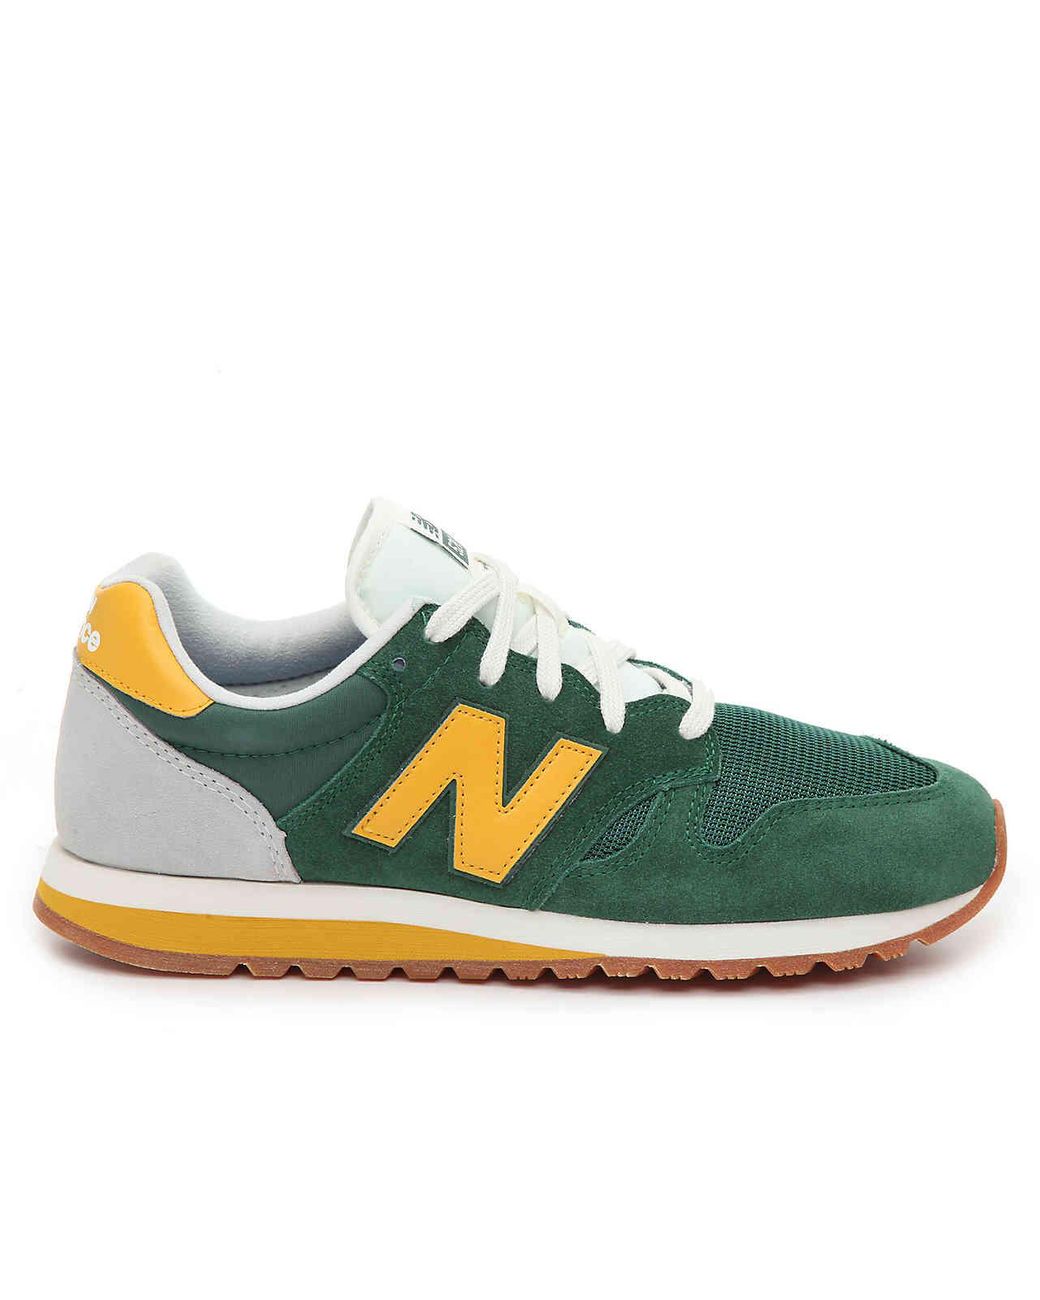 New Balance Suede 520 Sneaker in Green/Mustard Yellow (Green) for Men | Lyst